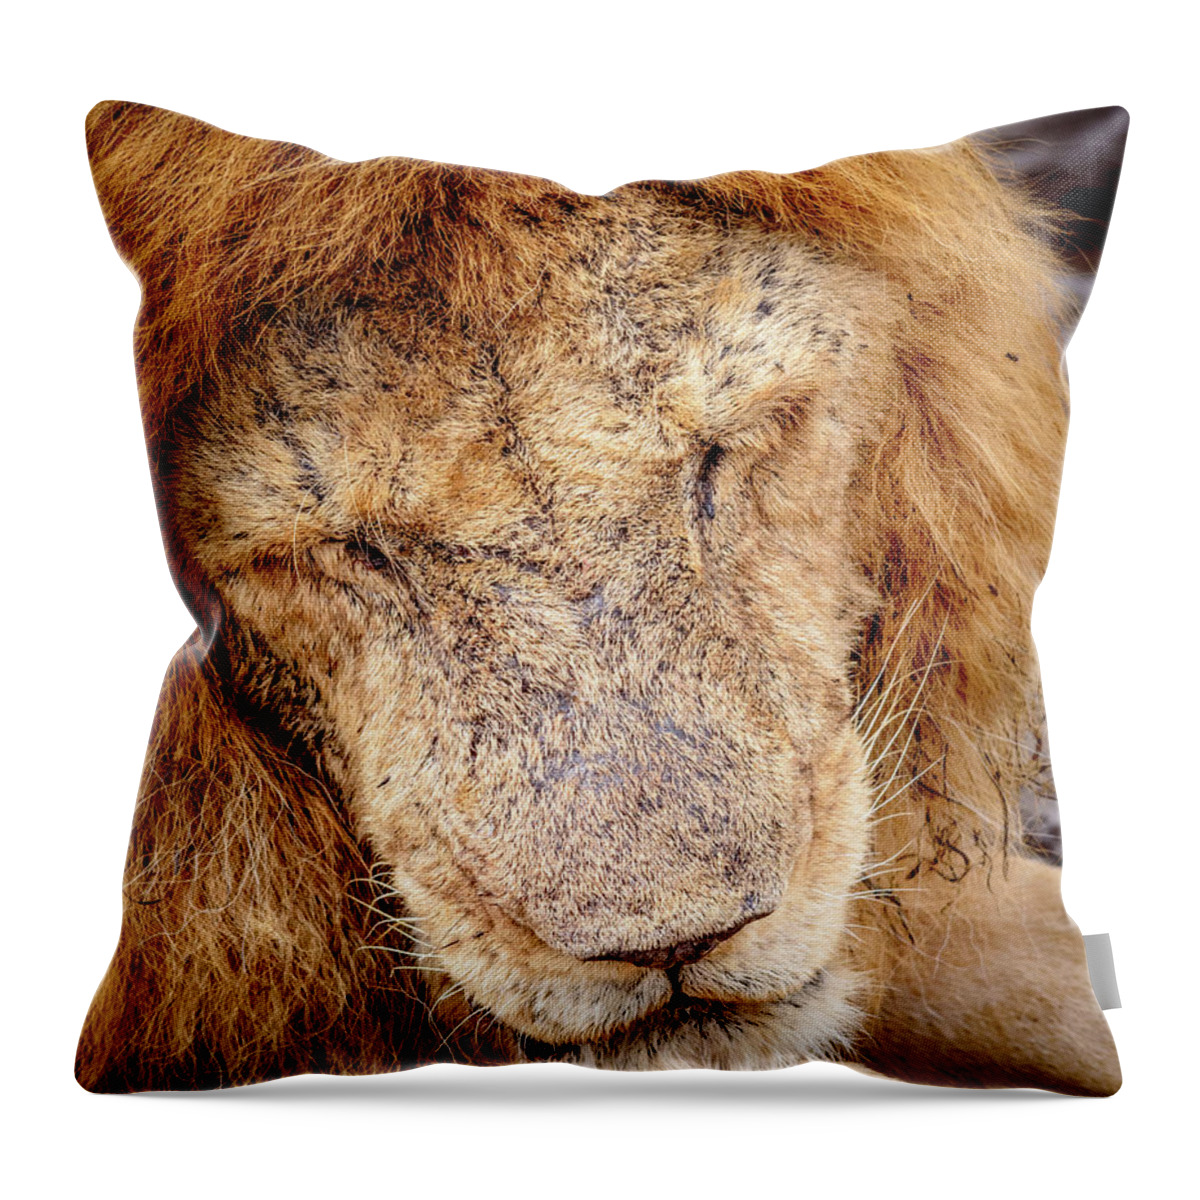 Africa Throw Pillow featuring the photograph Tired Lion by Adrian O Brien